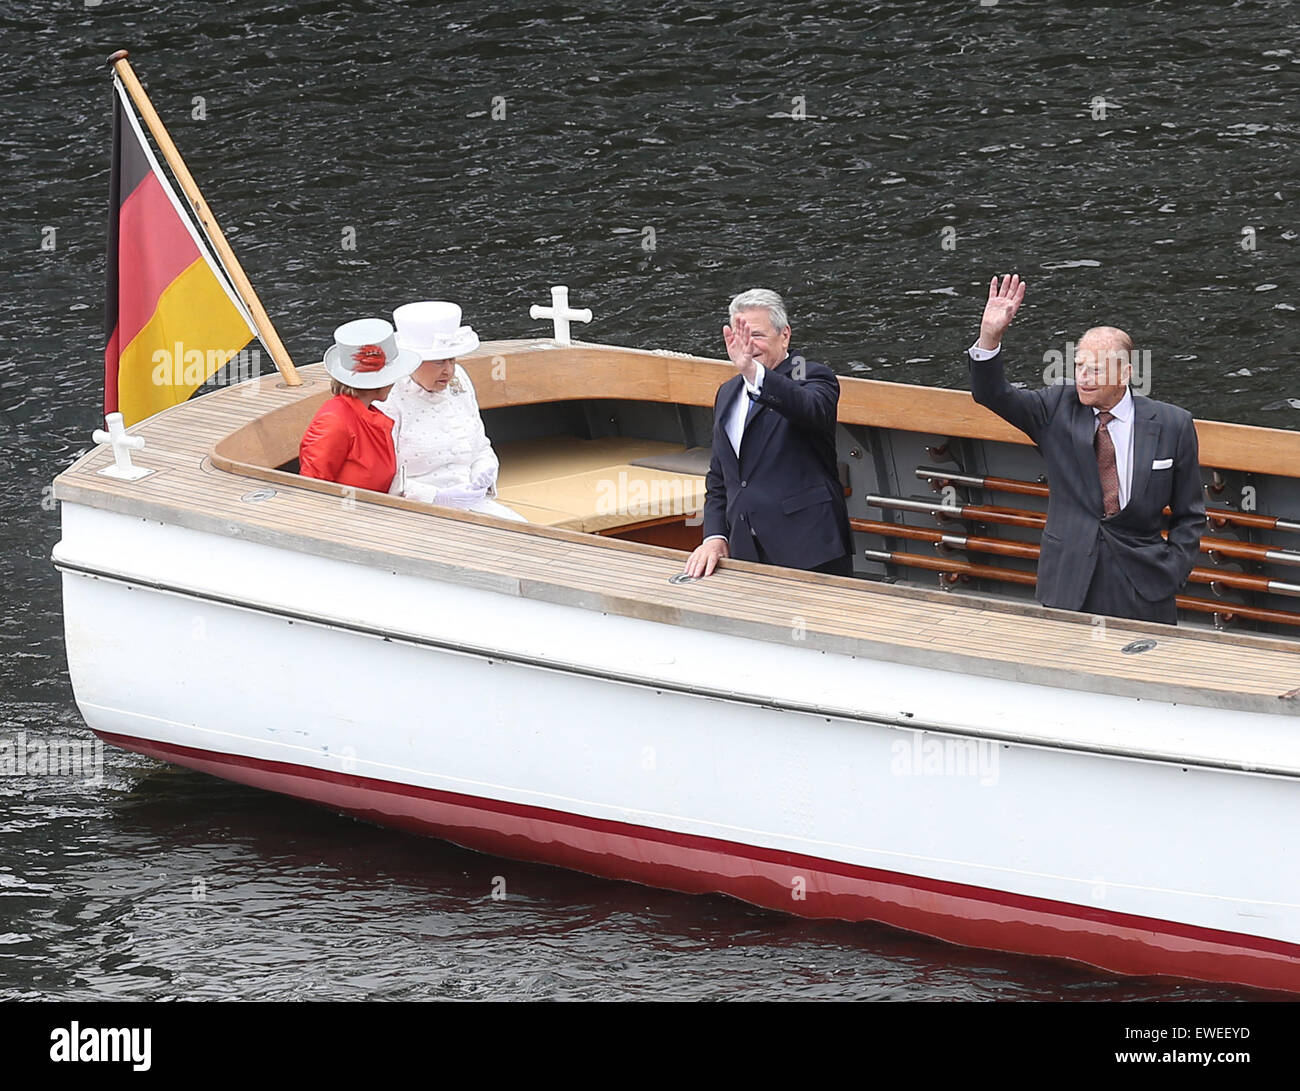 Berlin, Germany. 24th June, 2015. British Queen Elizabeth II. and Prince Philip (R), Duke of Edinburgh, accompanied by German President Joachim Gauck (2-R) and his partner Daniela Schadt (wearing red) ride along the Spree river during a boat tour in Berlin, Germany, 24 June 2015. The British Queen and her husband are on their fifth state visit to Germany. PHOTO: Wolfgang Kumm/dpa/Alamy Live News Stock Photo